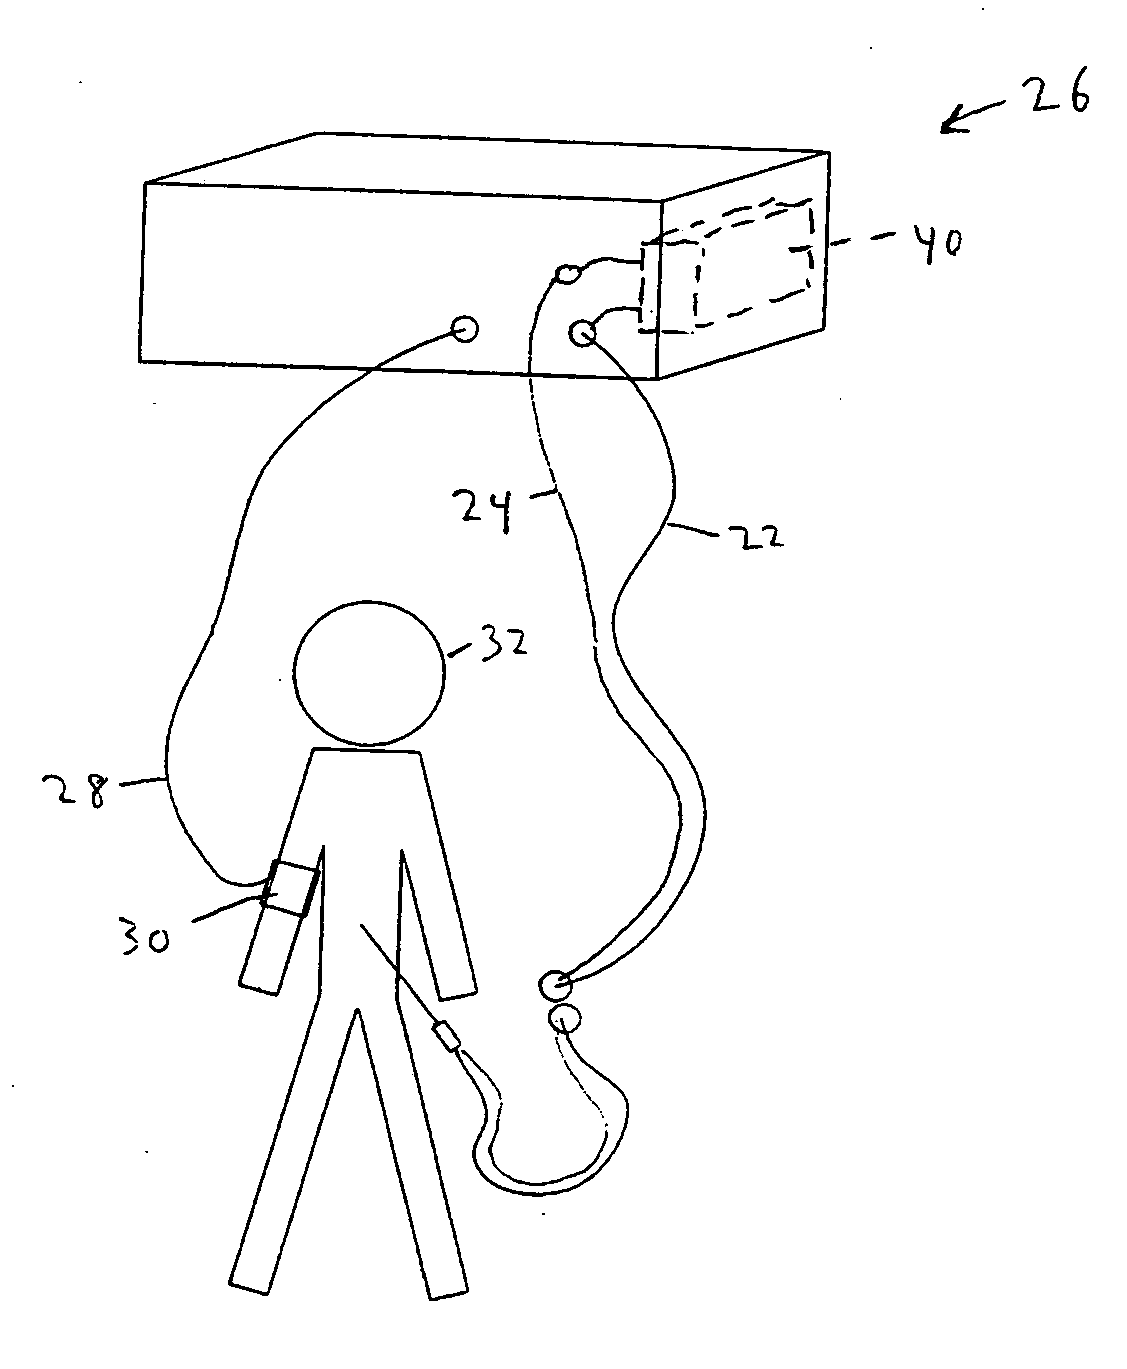 Hybrid cannula/electrode medical device and method